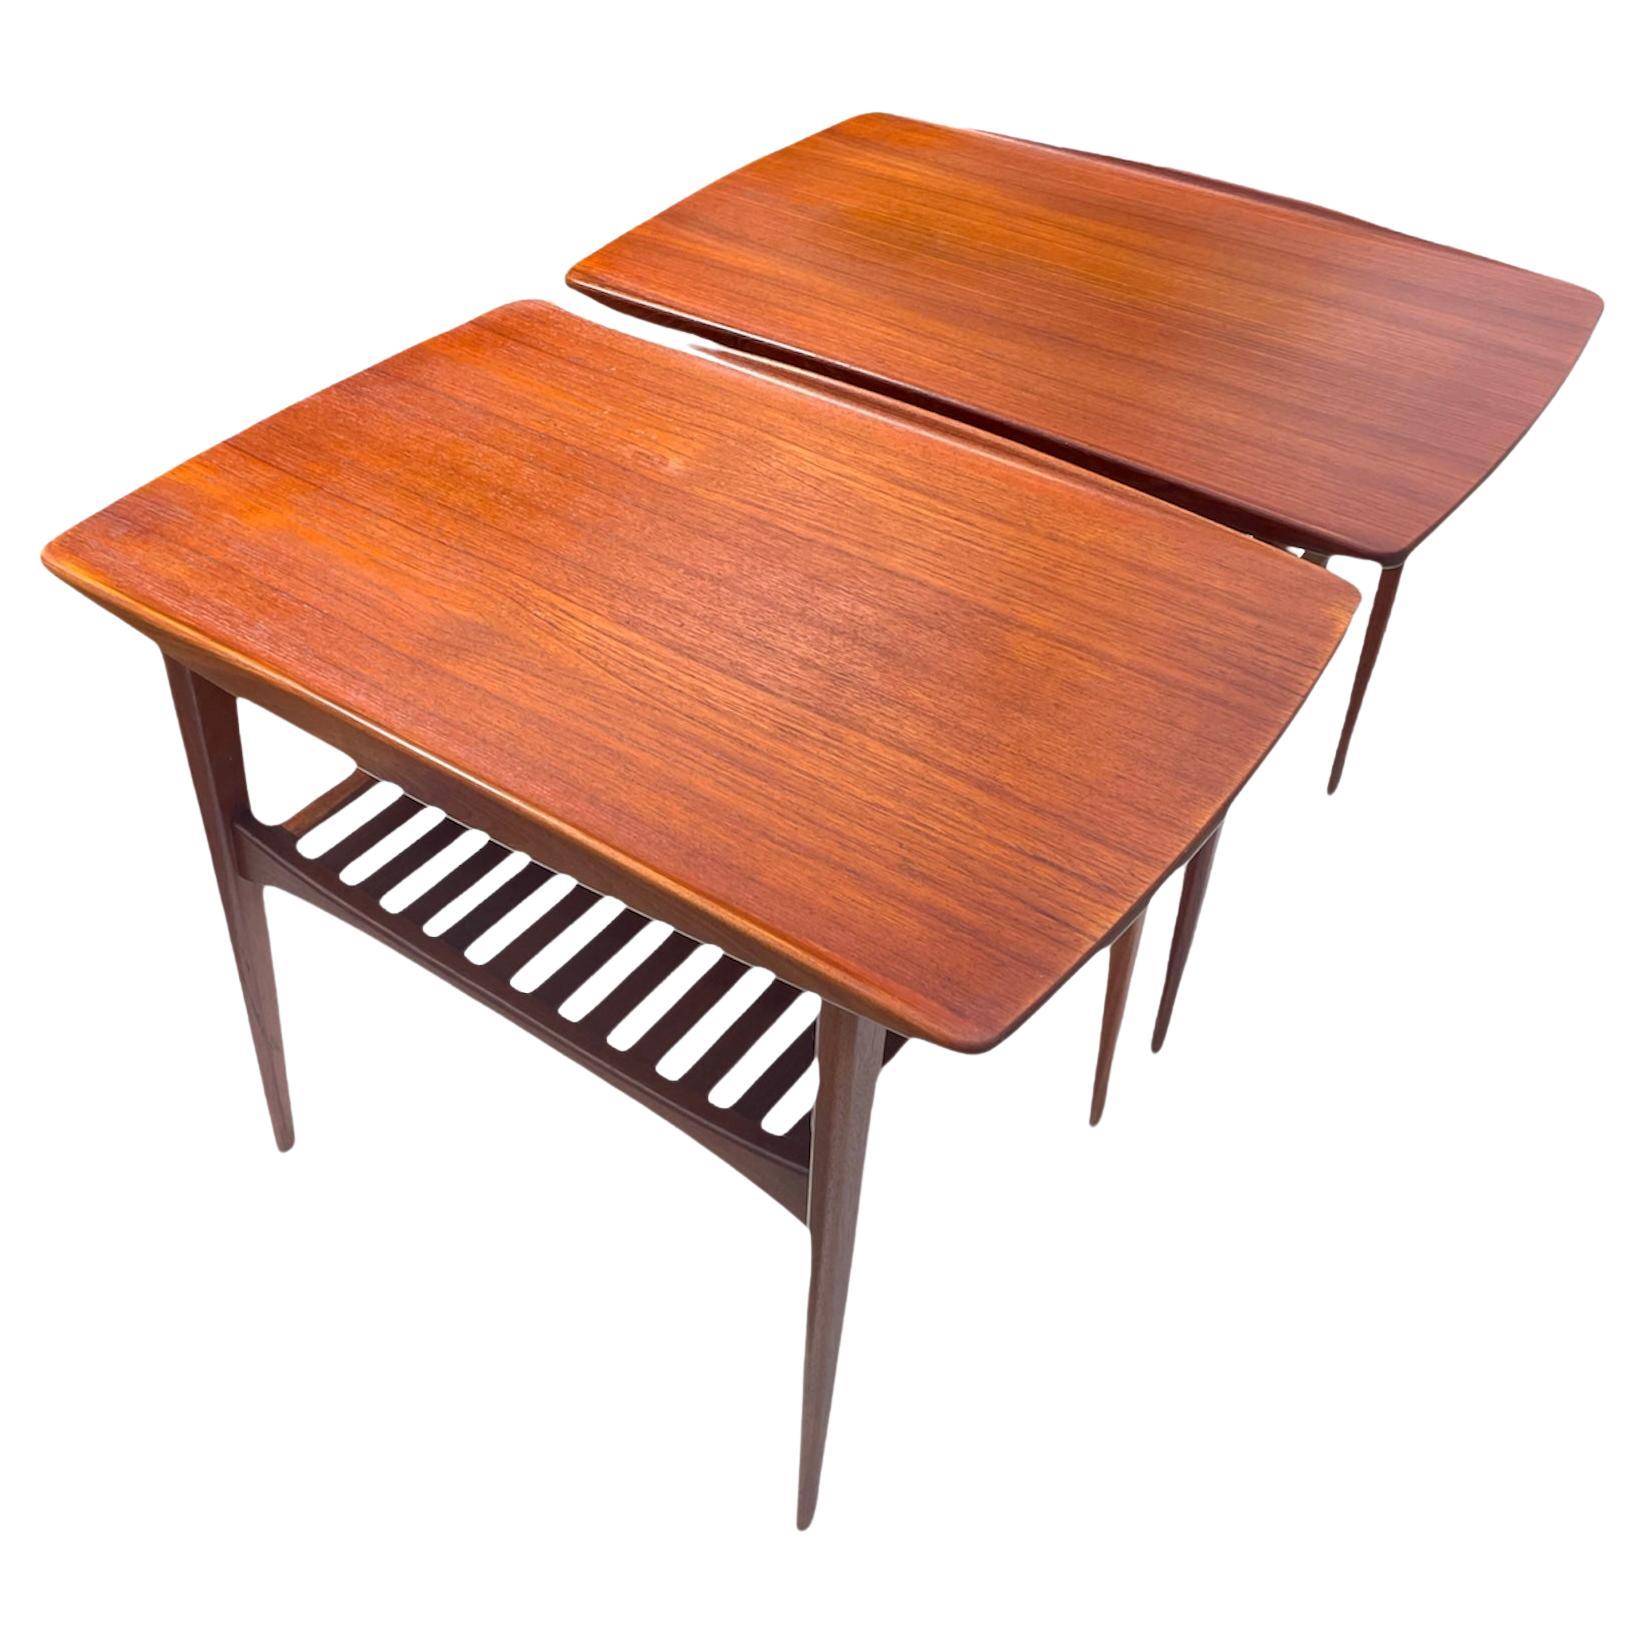 Mid-Century Modern Teak Side Tables by Tove and Edvard